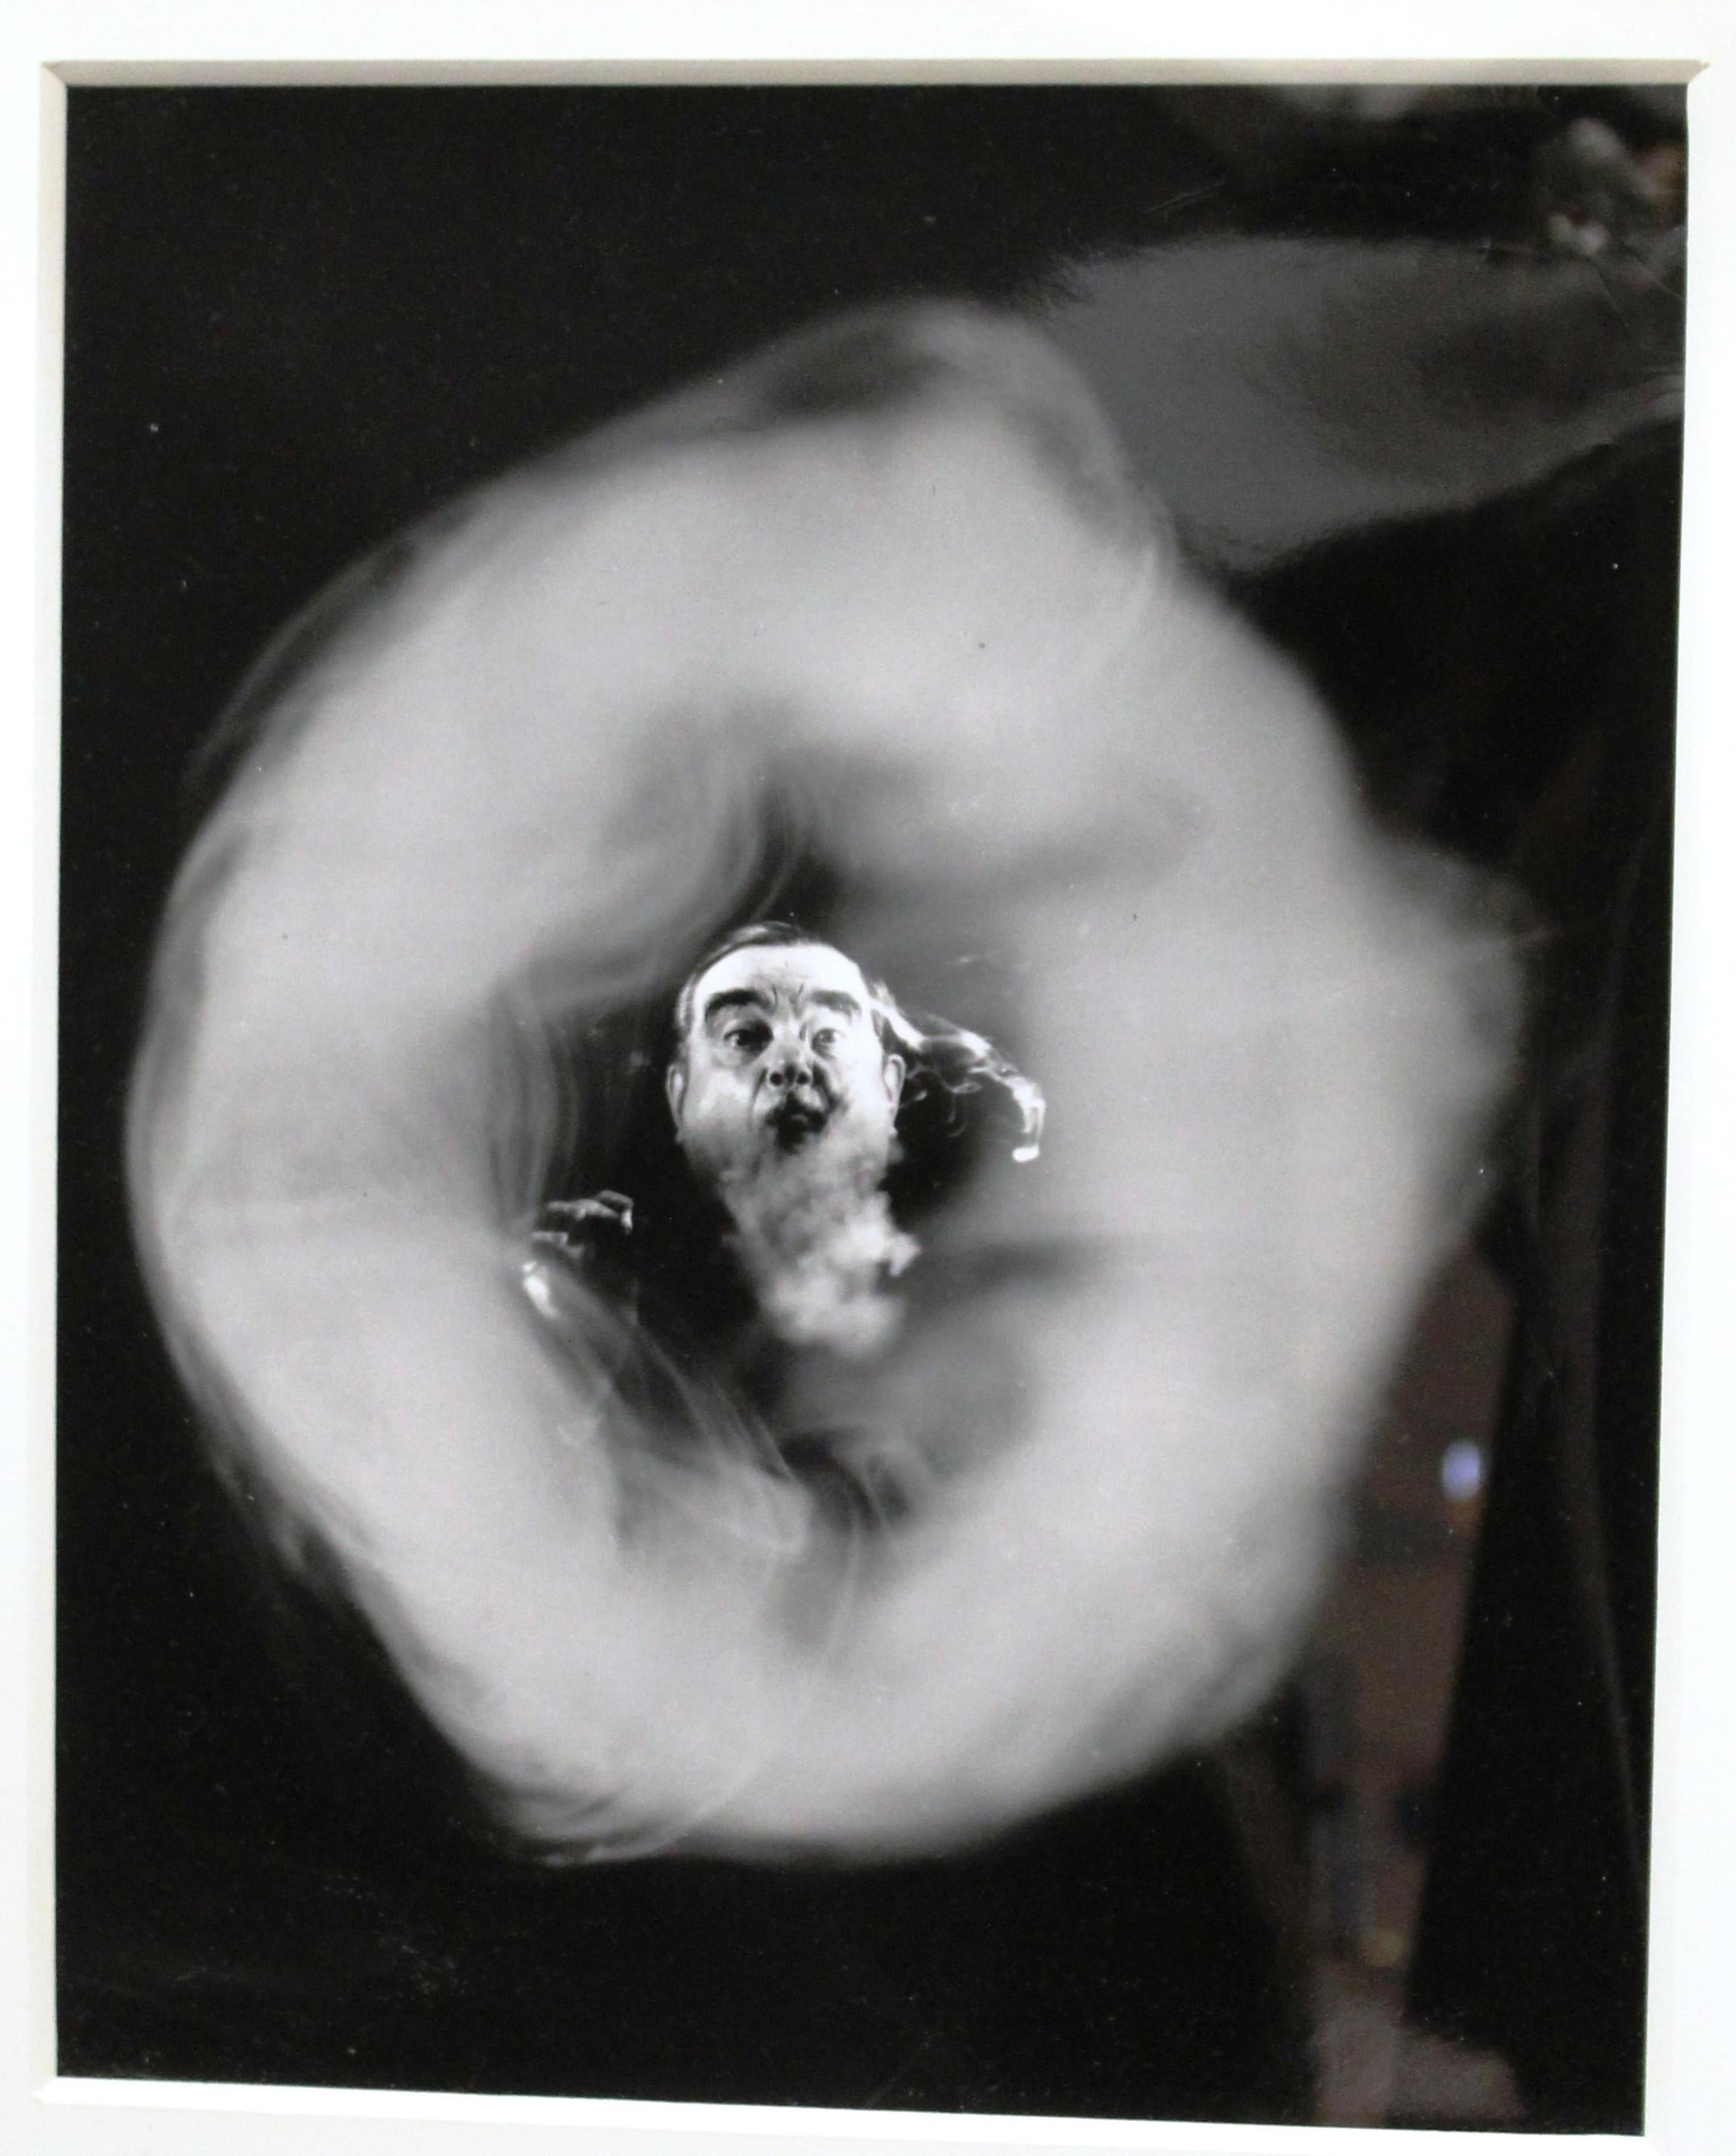 Framed 'Smoke Ring Blower' silver gelatin print photo series from LIFE Magazine, photographed by American photojournalist Howard Sochurek in 1949. Each photo measures 14 in. x 11 in. in dimension. Two of the three photos (excluding the middle one)